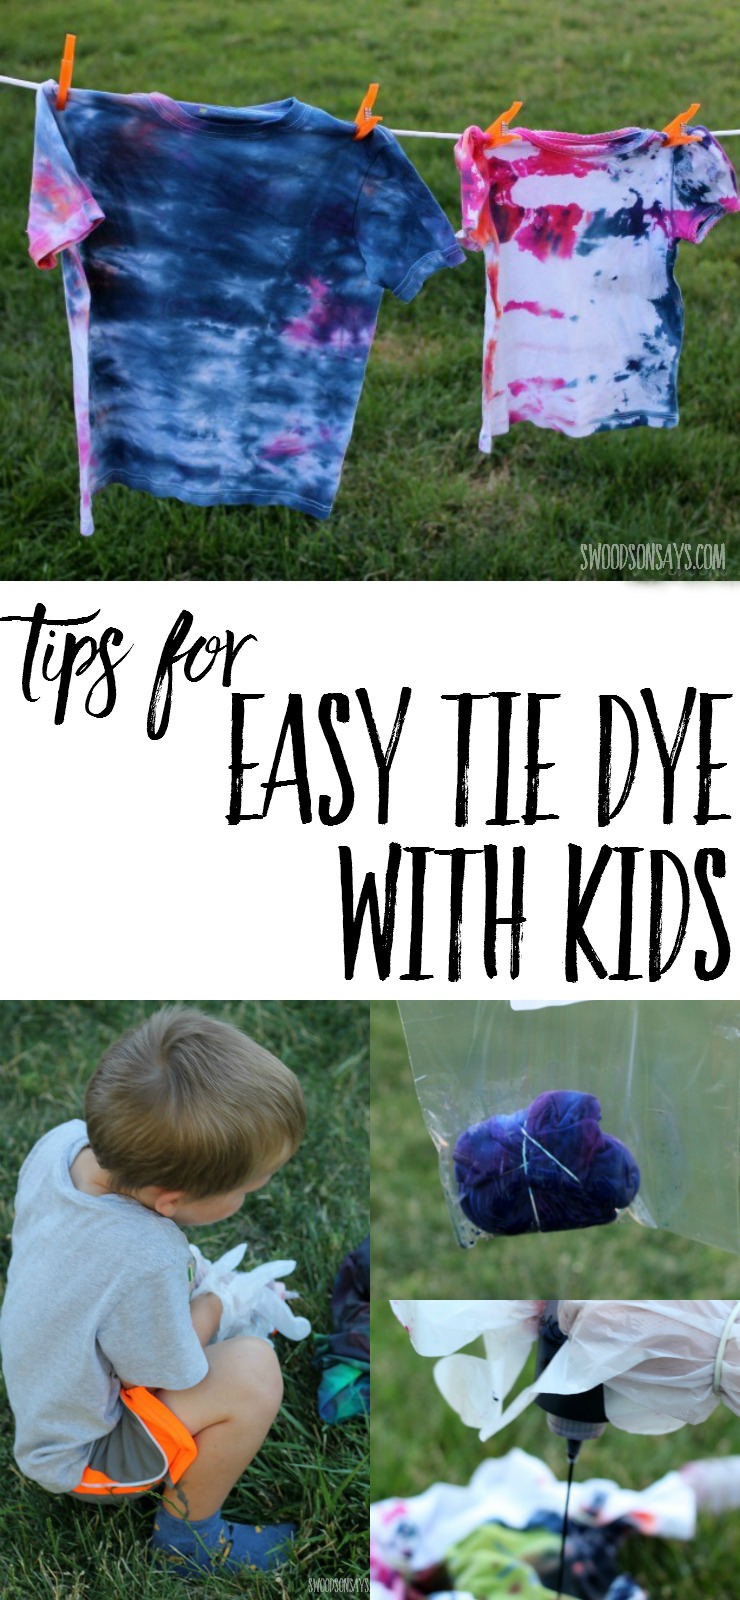 Tie dye with kids can be easy and fun! Check out these tips for tie dyeing that makes a minimal mess - perfect summer craft for older kiddos and a great "camp shirt" idea. 